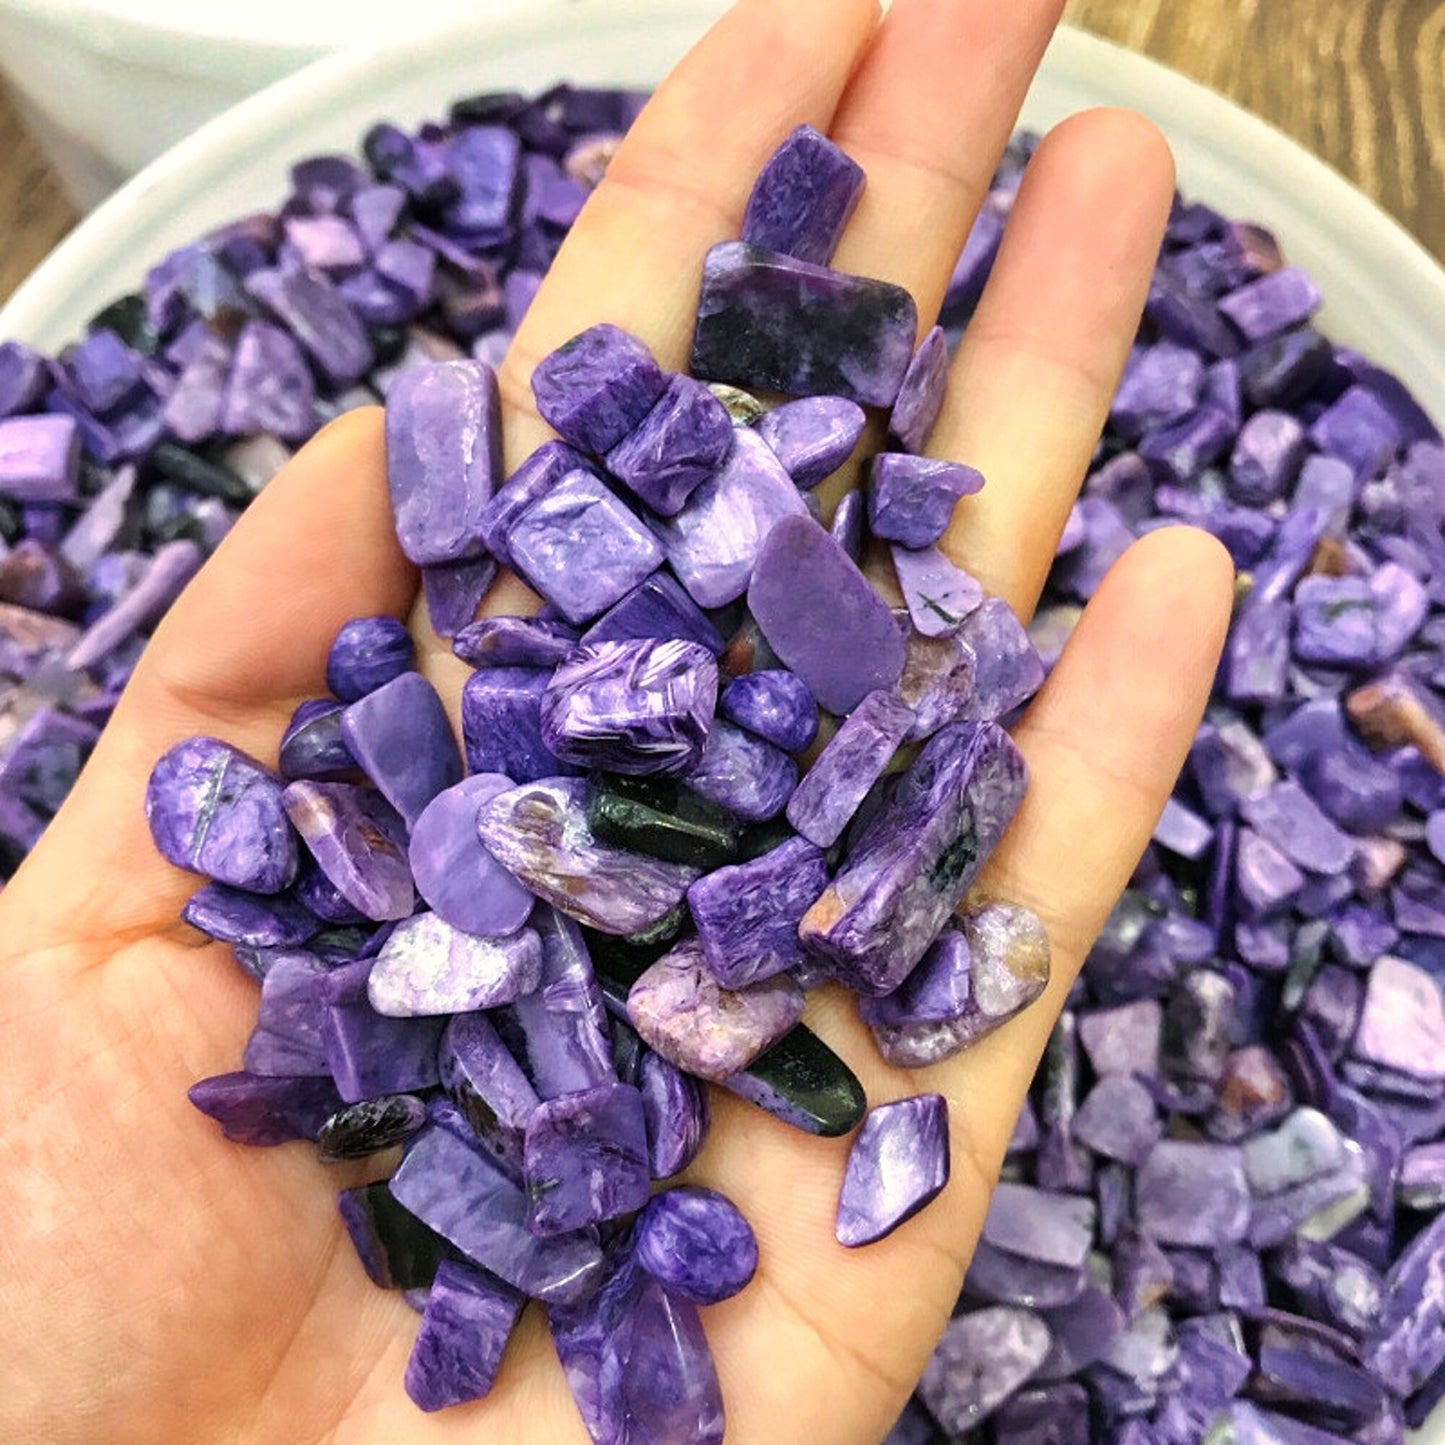 100g Charoite Crystal Gravel - Raw Gemstone Quartz Rock for Healing - Natural and Perfect Gift